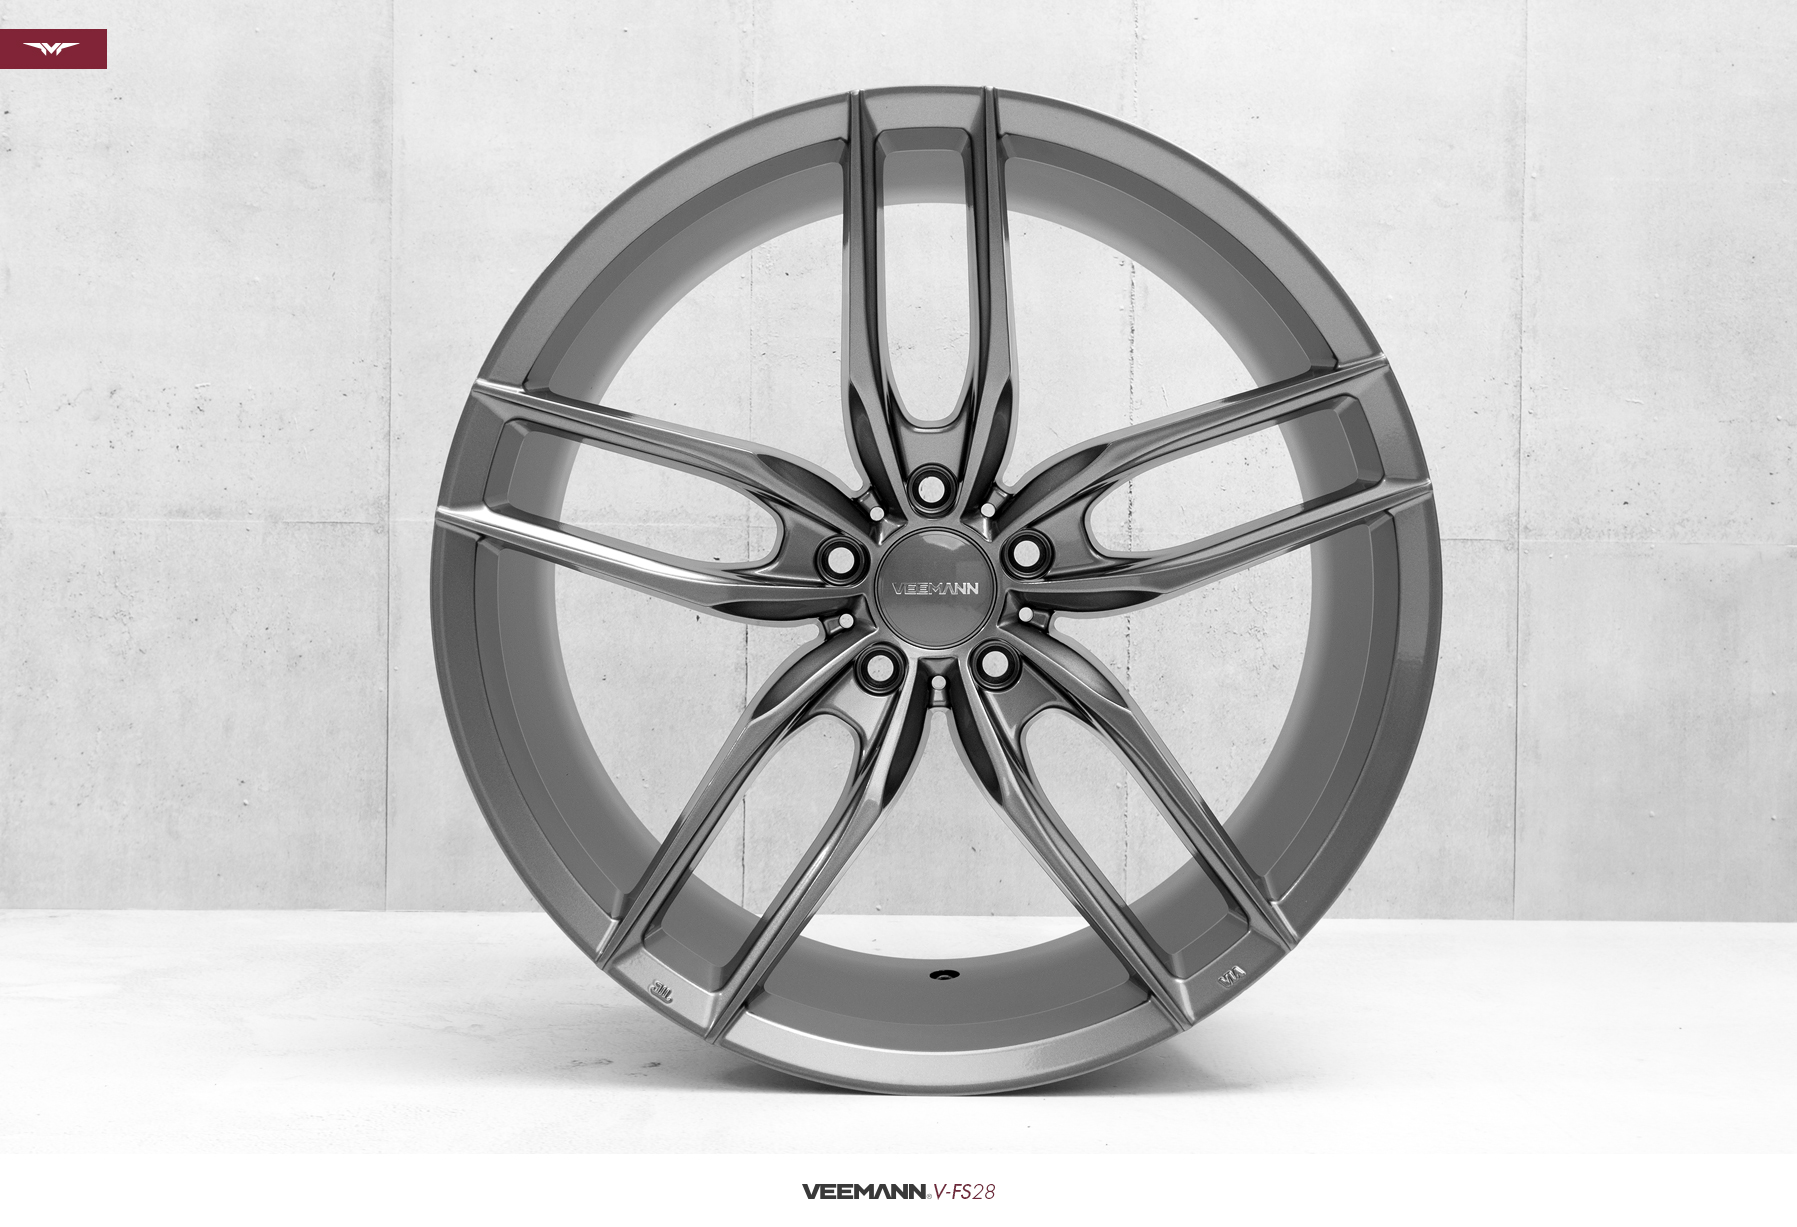 NEW 19" VEEMANN V-FS28 ALLOY WHEELS IN GLOSS GRAPHITE WITH DEEPER CONCAVE 9.5" REARS et42/40